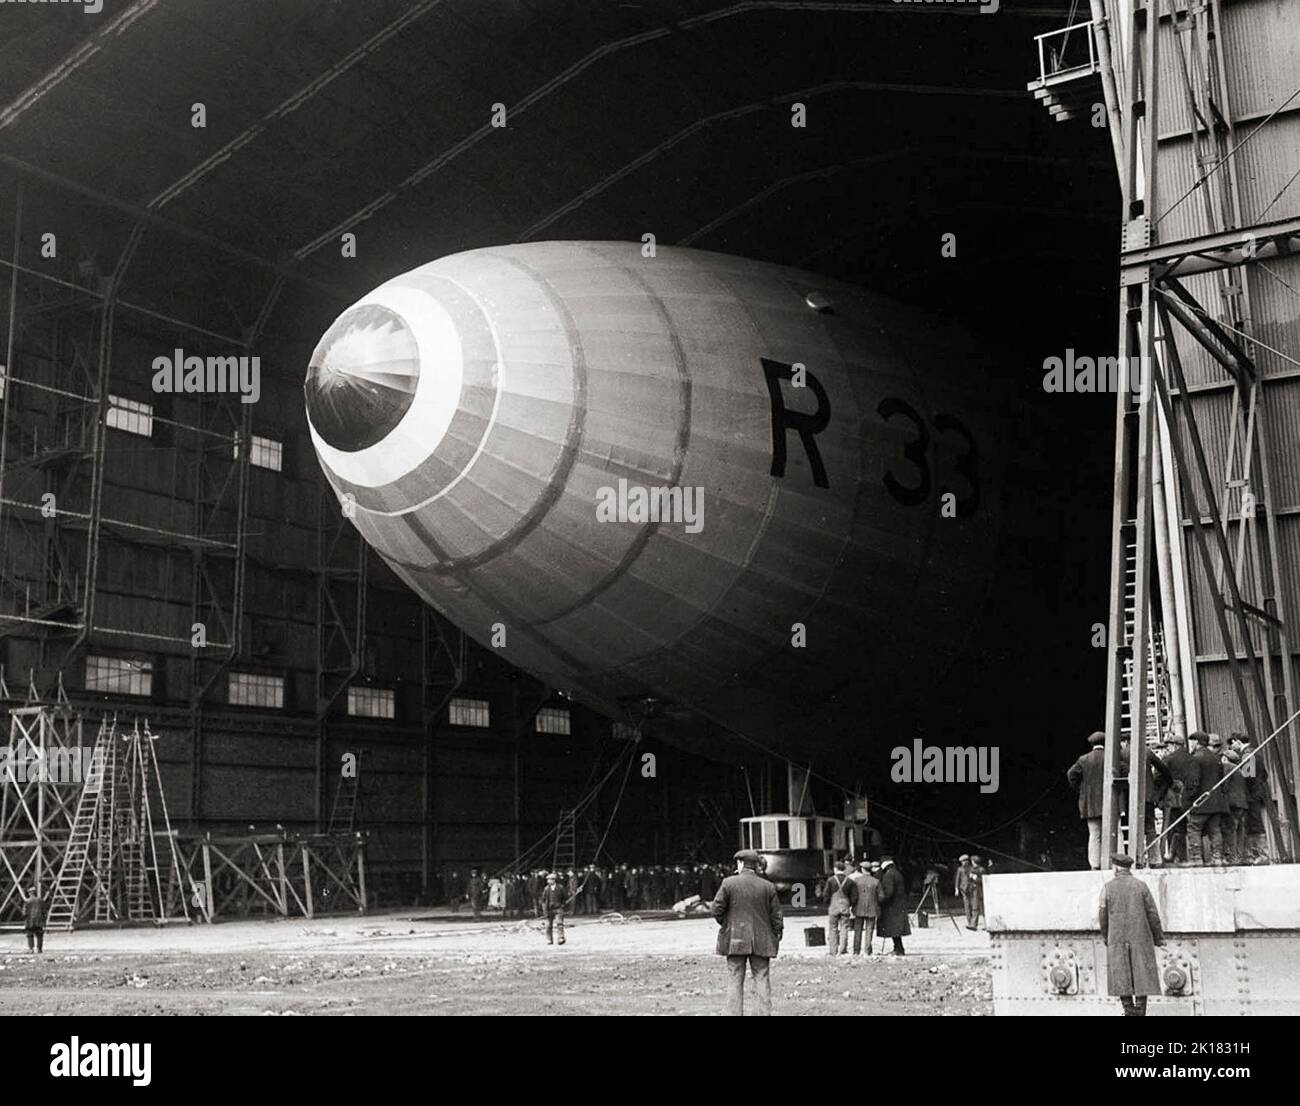 Airship R33 a British rigid airship, in its hanger at  RAF Pulham in Norfolk, England in 1925. The airships were built by Armstrong Whitworth for the Royal Naval Air Service during the First World War, but were not completed until after the end of hostilities, by which time the RNAS had become part of the Royal Air Force. Her first flight was in early 1919 then sent to Pulham airship station she clocked up over 300 flying hours in tests and the training of crew. Stock Photo